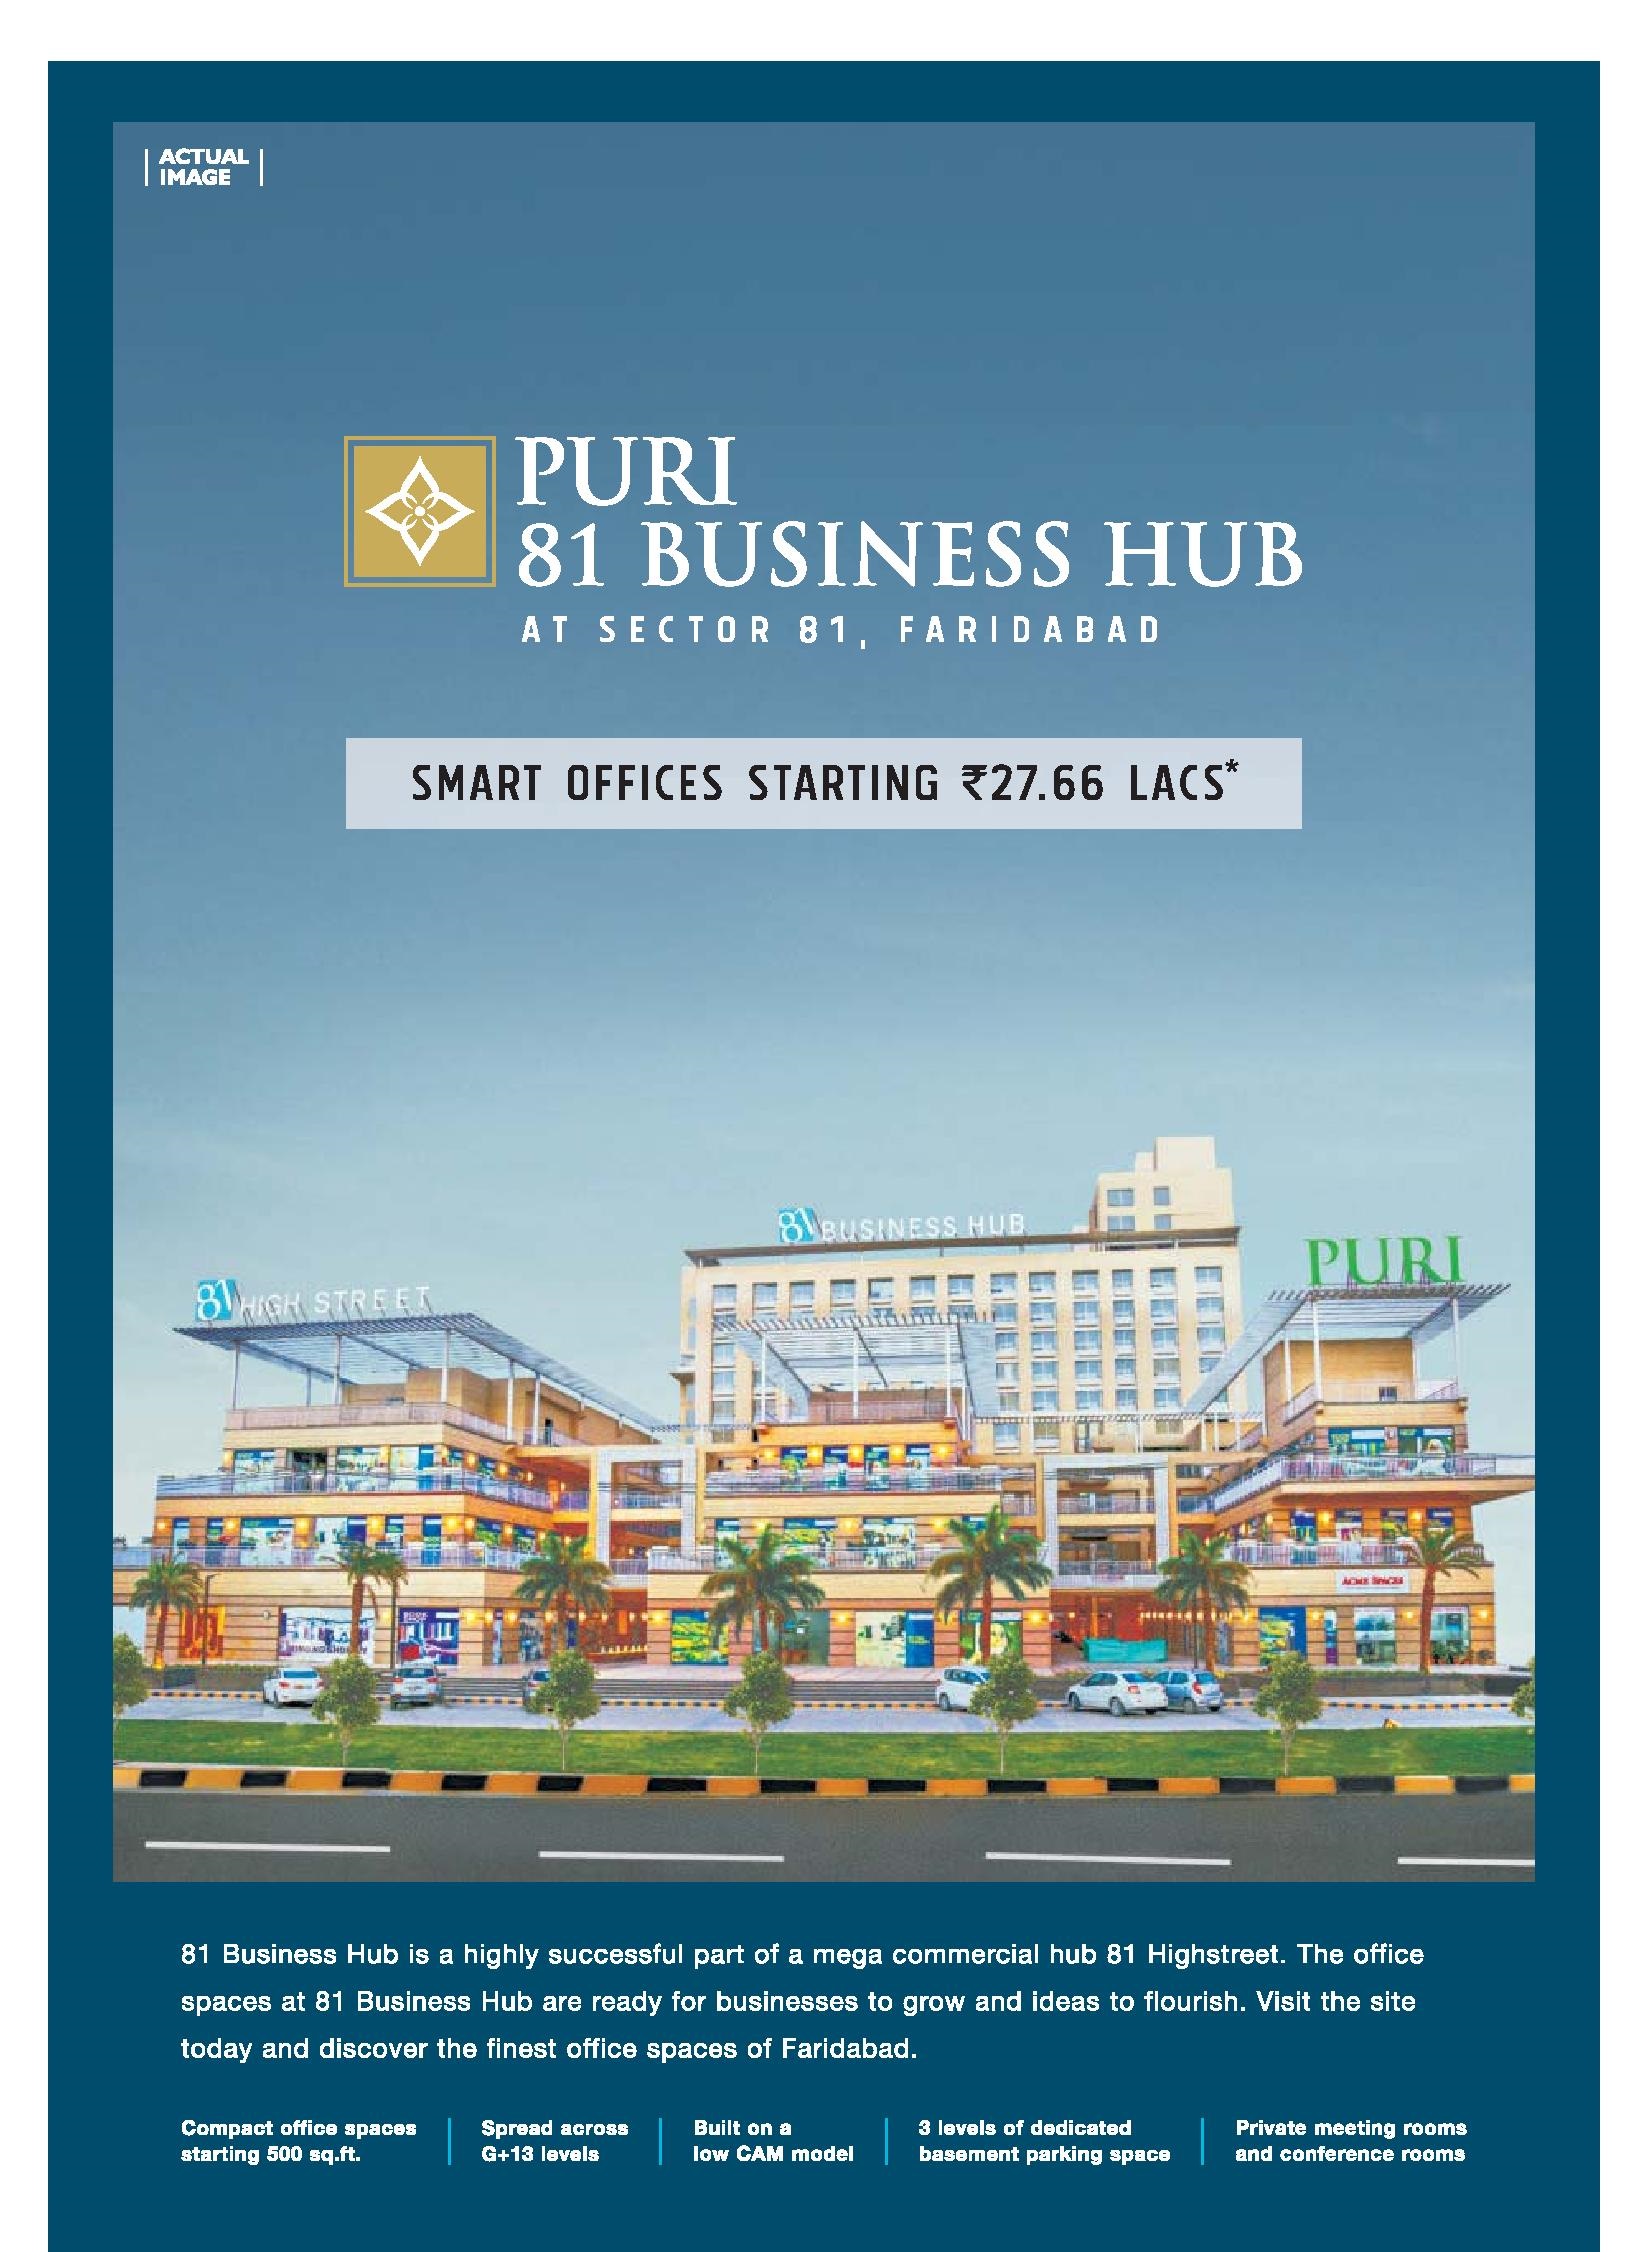 Invest in Puri 81 Business hub at Sector 81, Faridabad Update